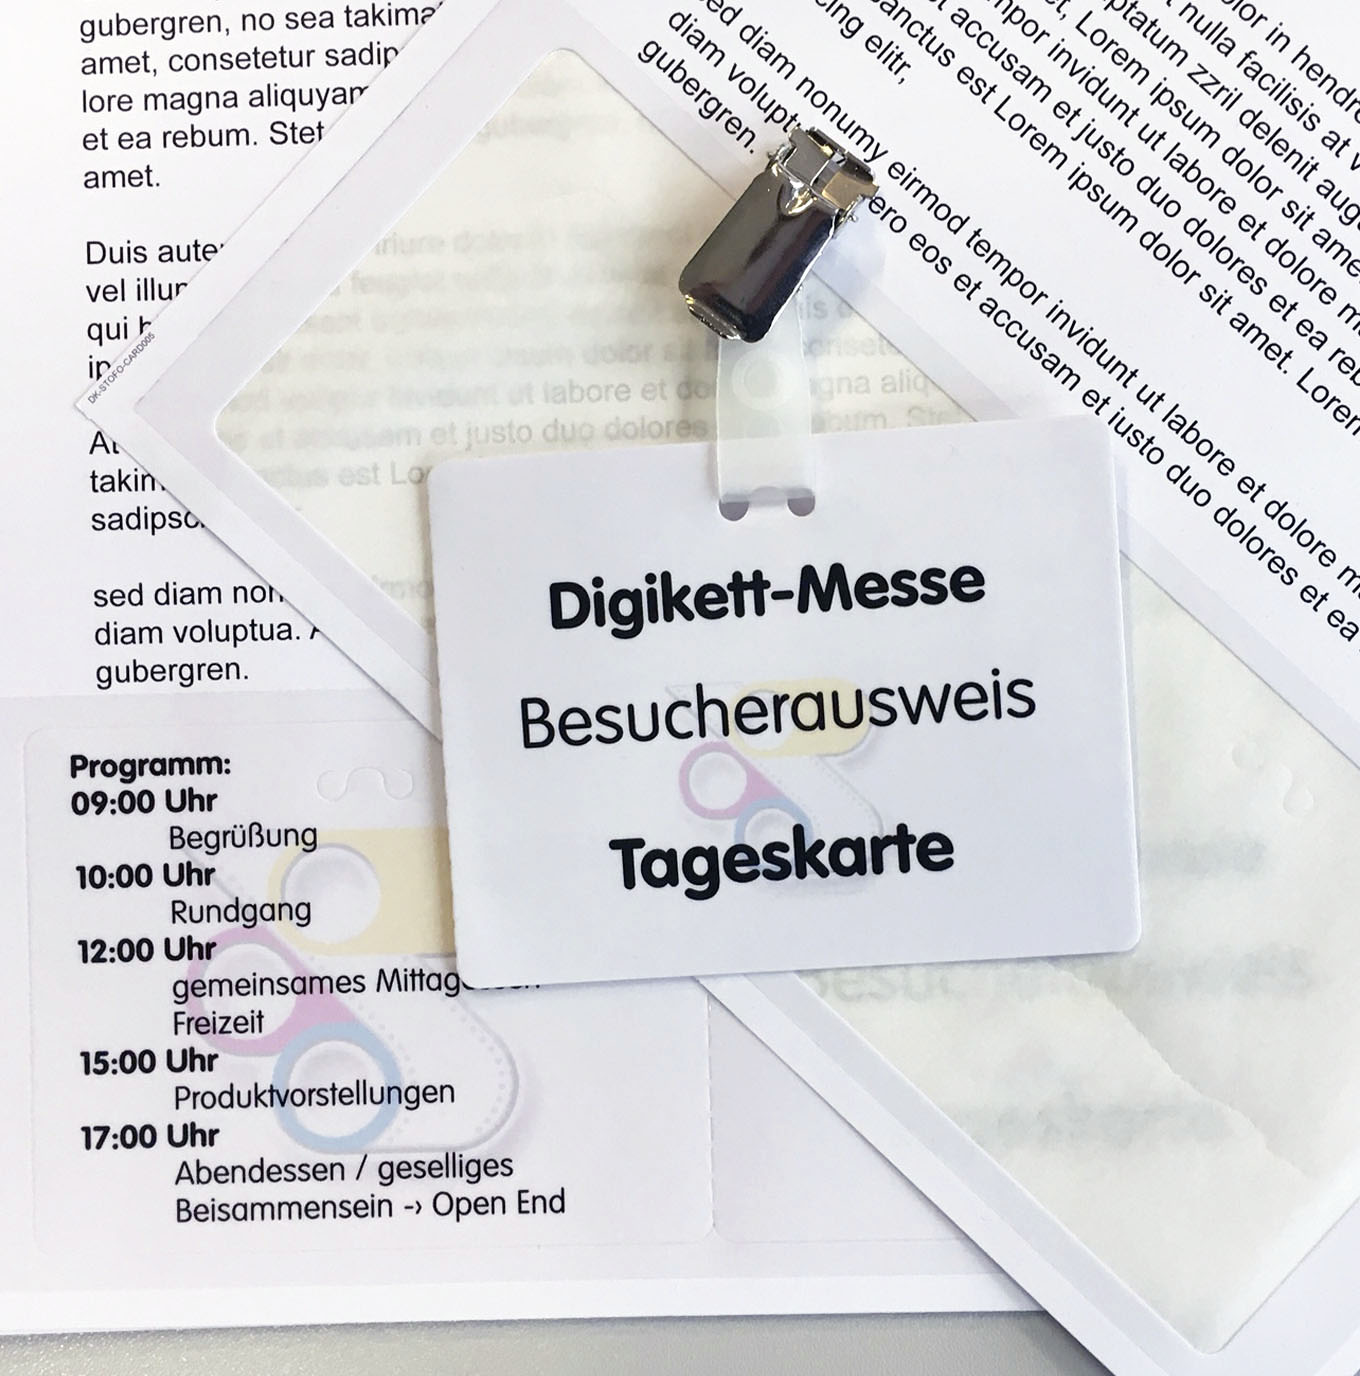 printed conference badge